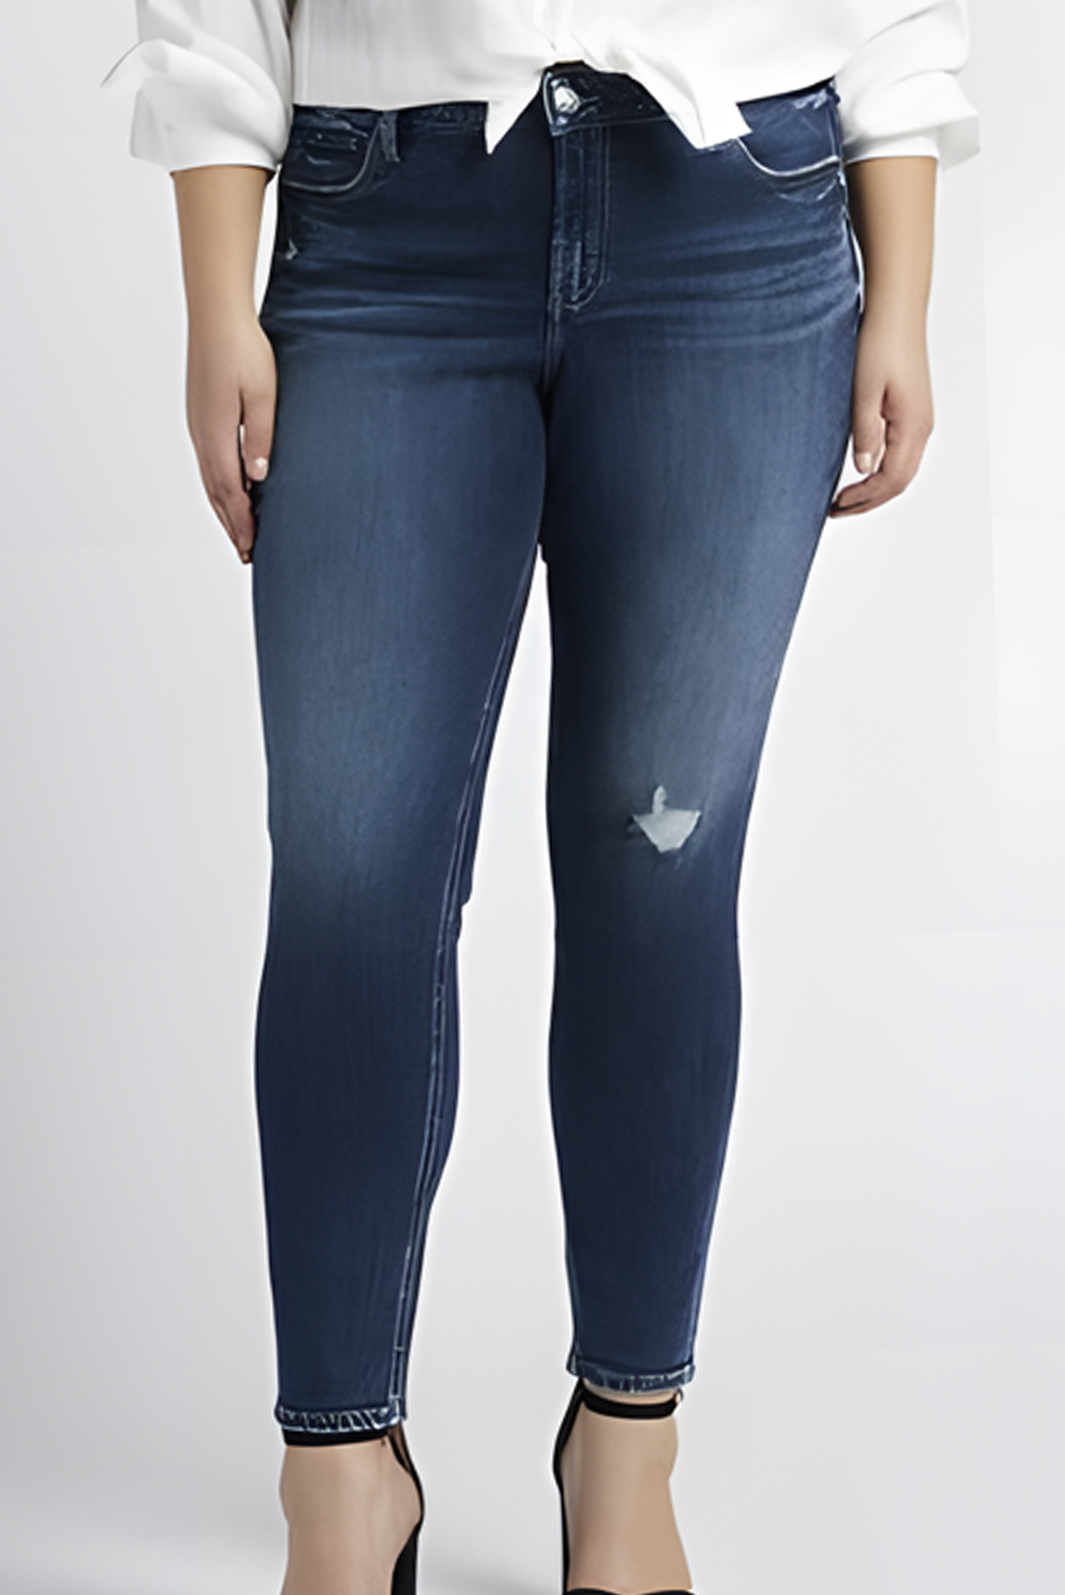 Silver Jeans Plus Size Elyse Skinny Jeans